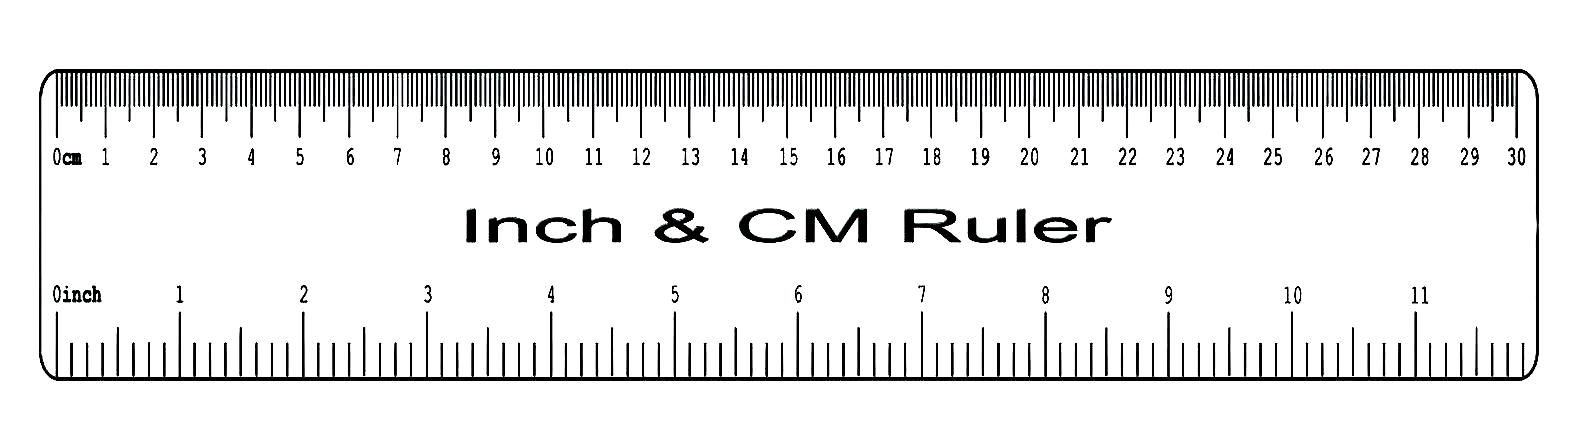 Printable 6 inch 12 inch Ruler Actual Size in Mm, Cm Scale